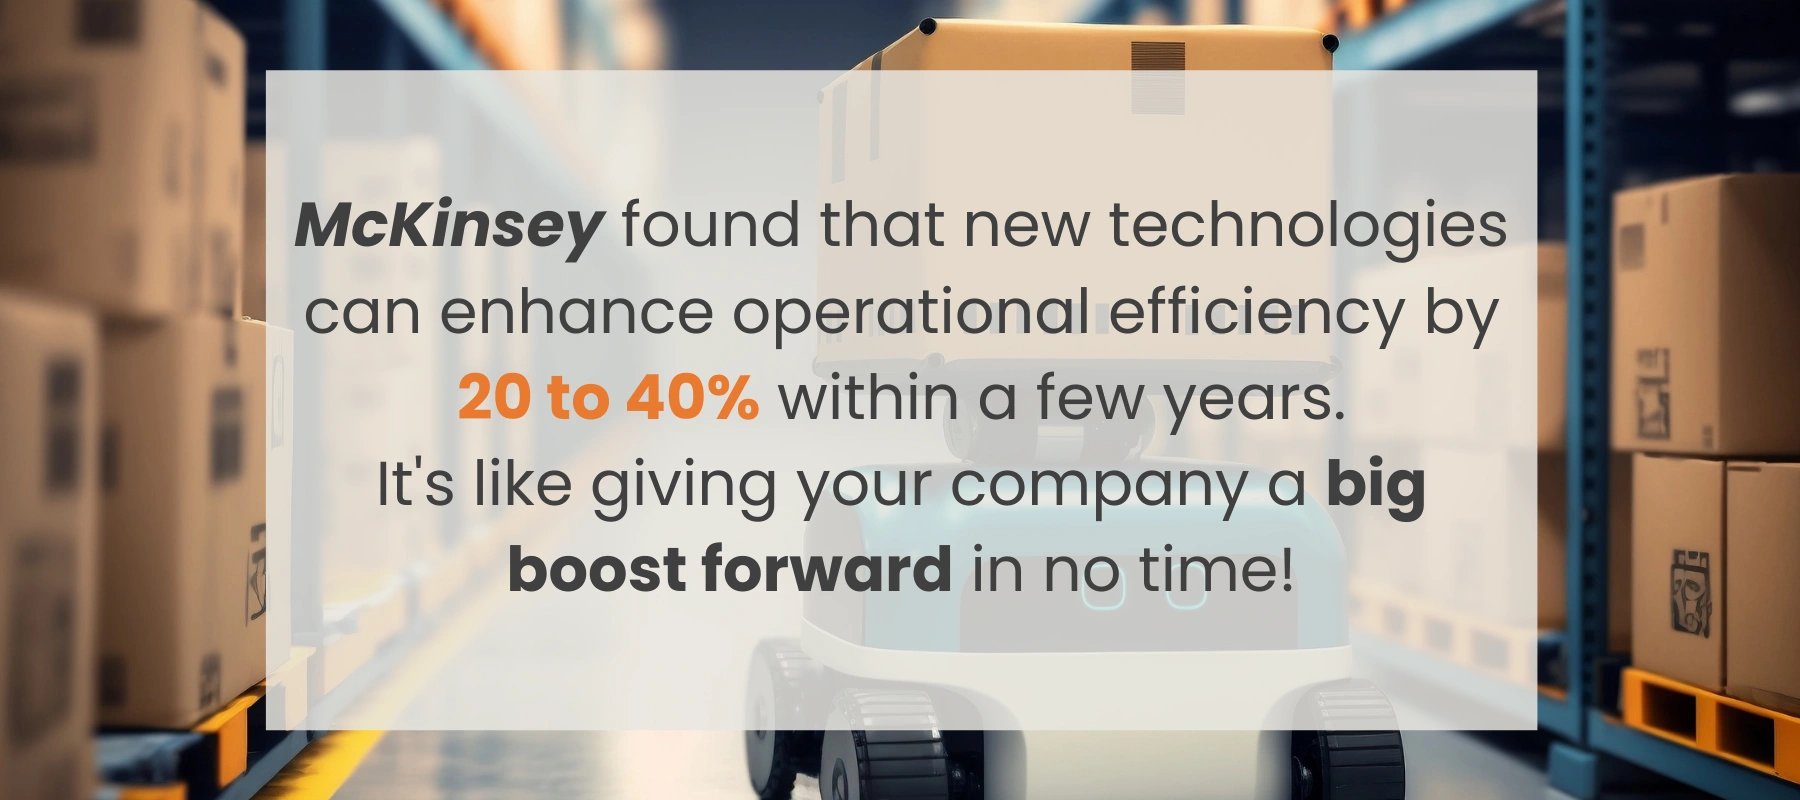 According to McKinsey, cost savings in logistics are heavily dependent on tech innovation